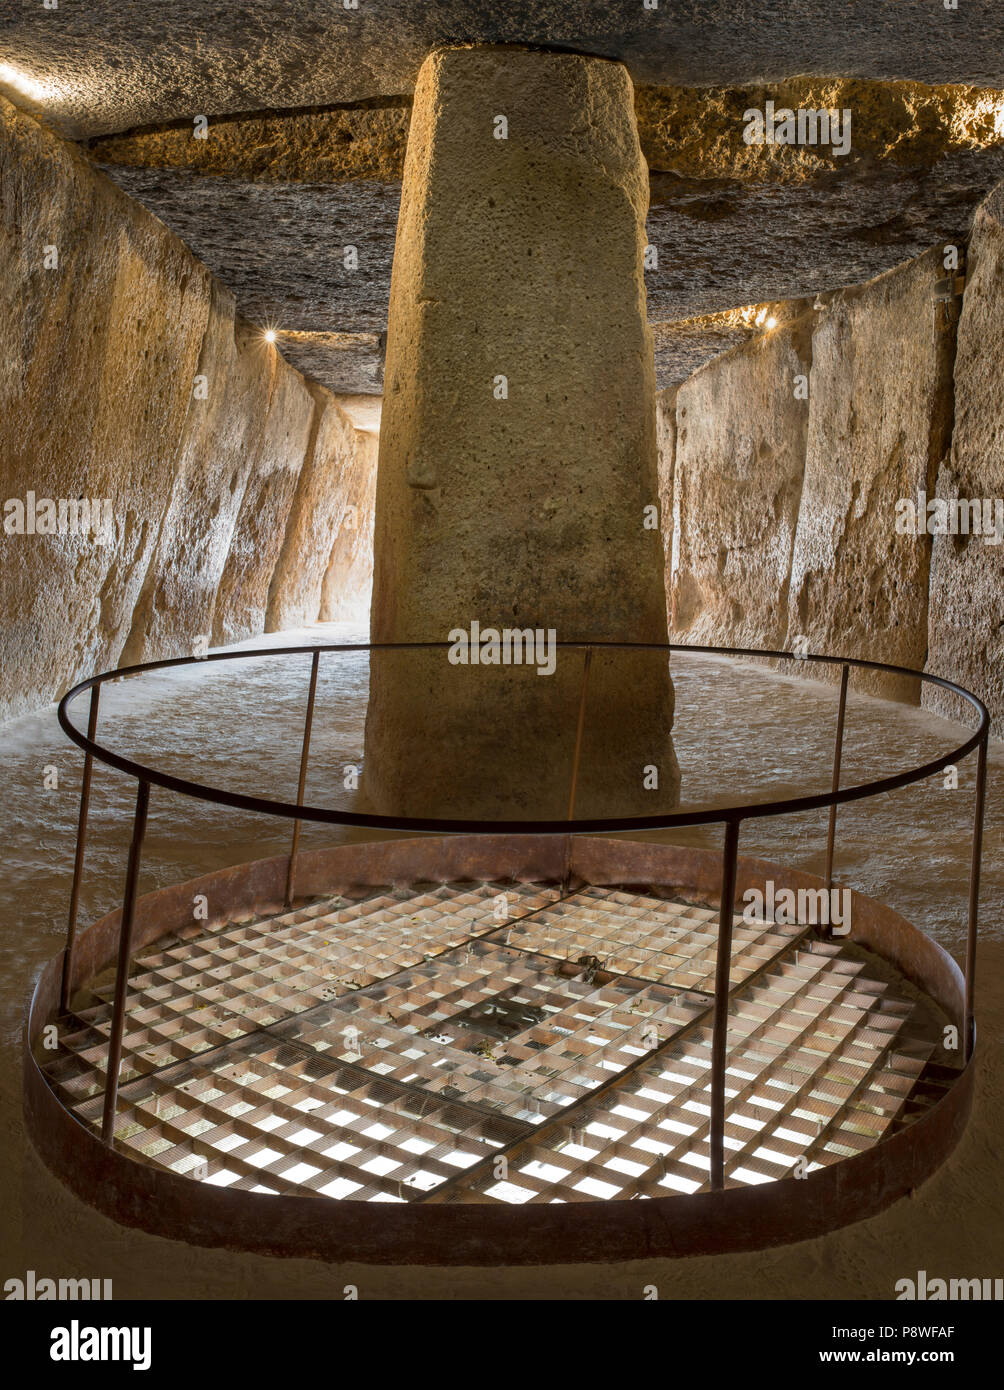 Antequera, Spain - July 10th, 2018: Deep well at Dolmen of Menga, Antequera, Spain Stock Photo